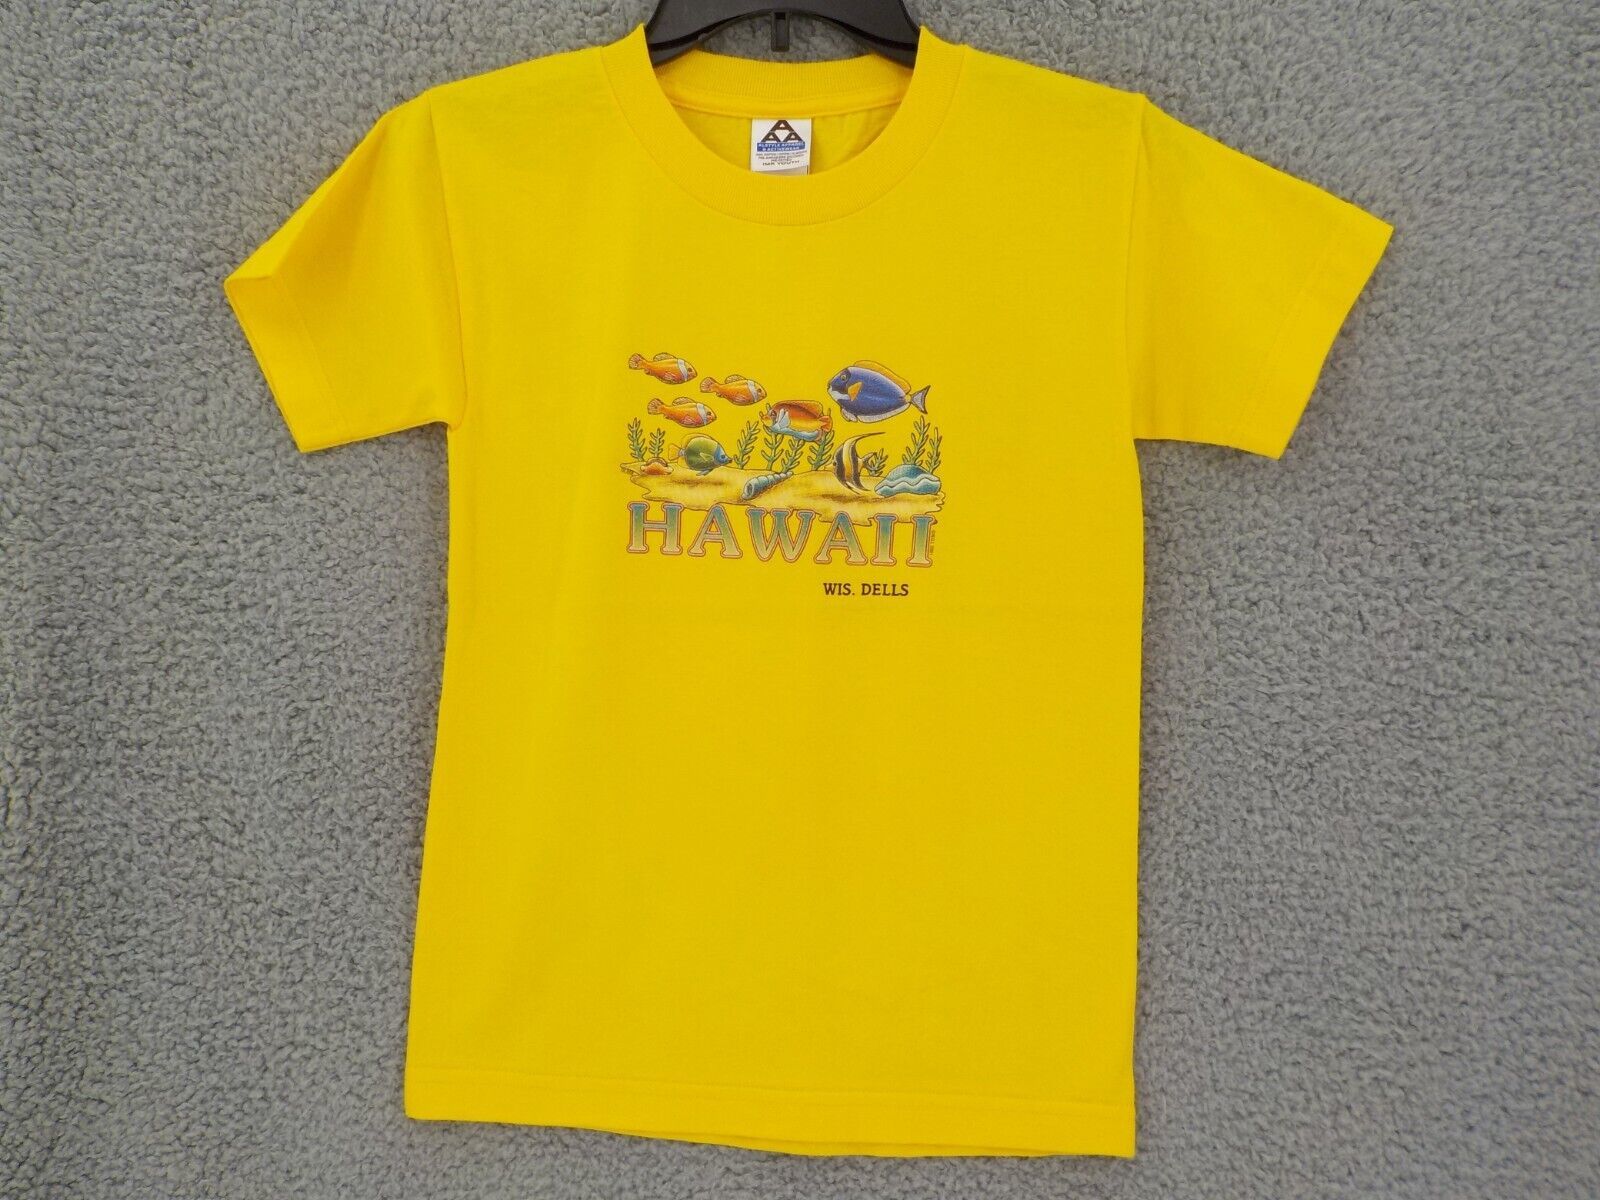 YOUTH YELLOW T-SHIRT SZ M (10-12) "HAWAII" BRIGHT ASSORTED FISH WISCONSIN DELLS - £7.83 GBP